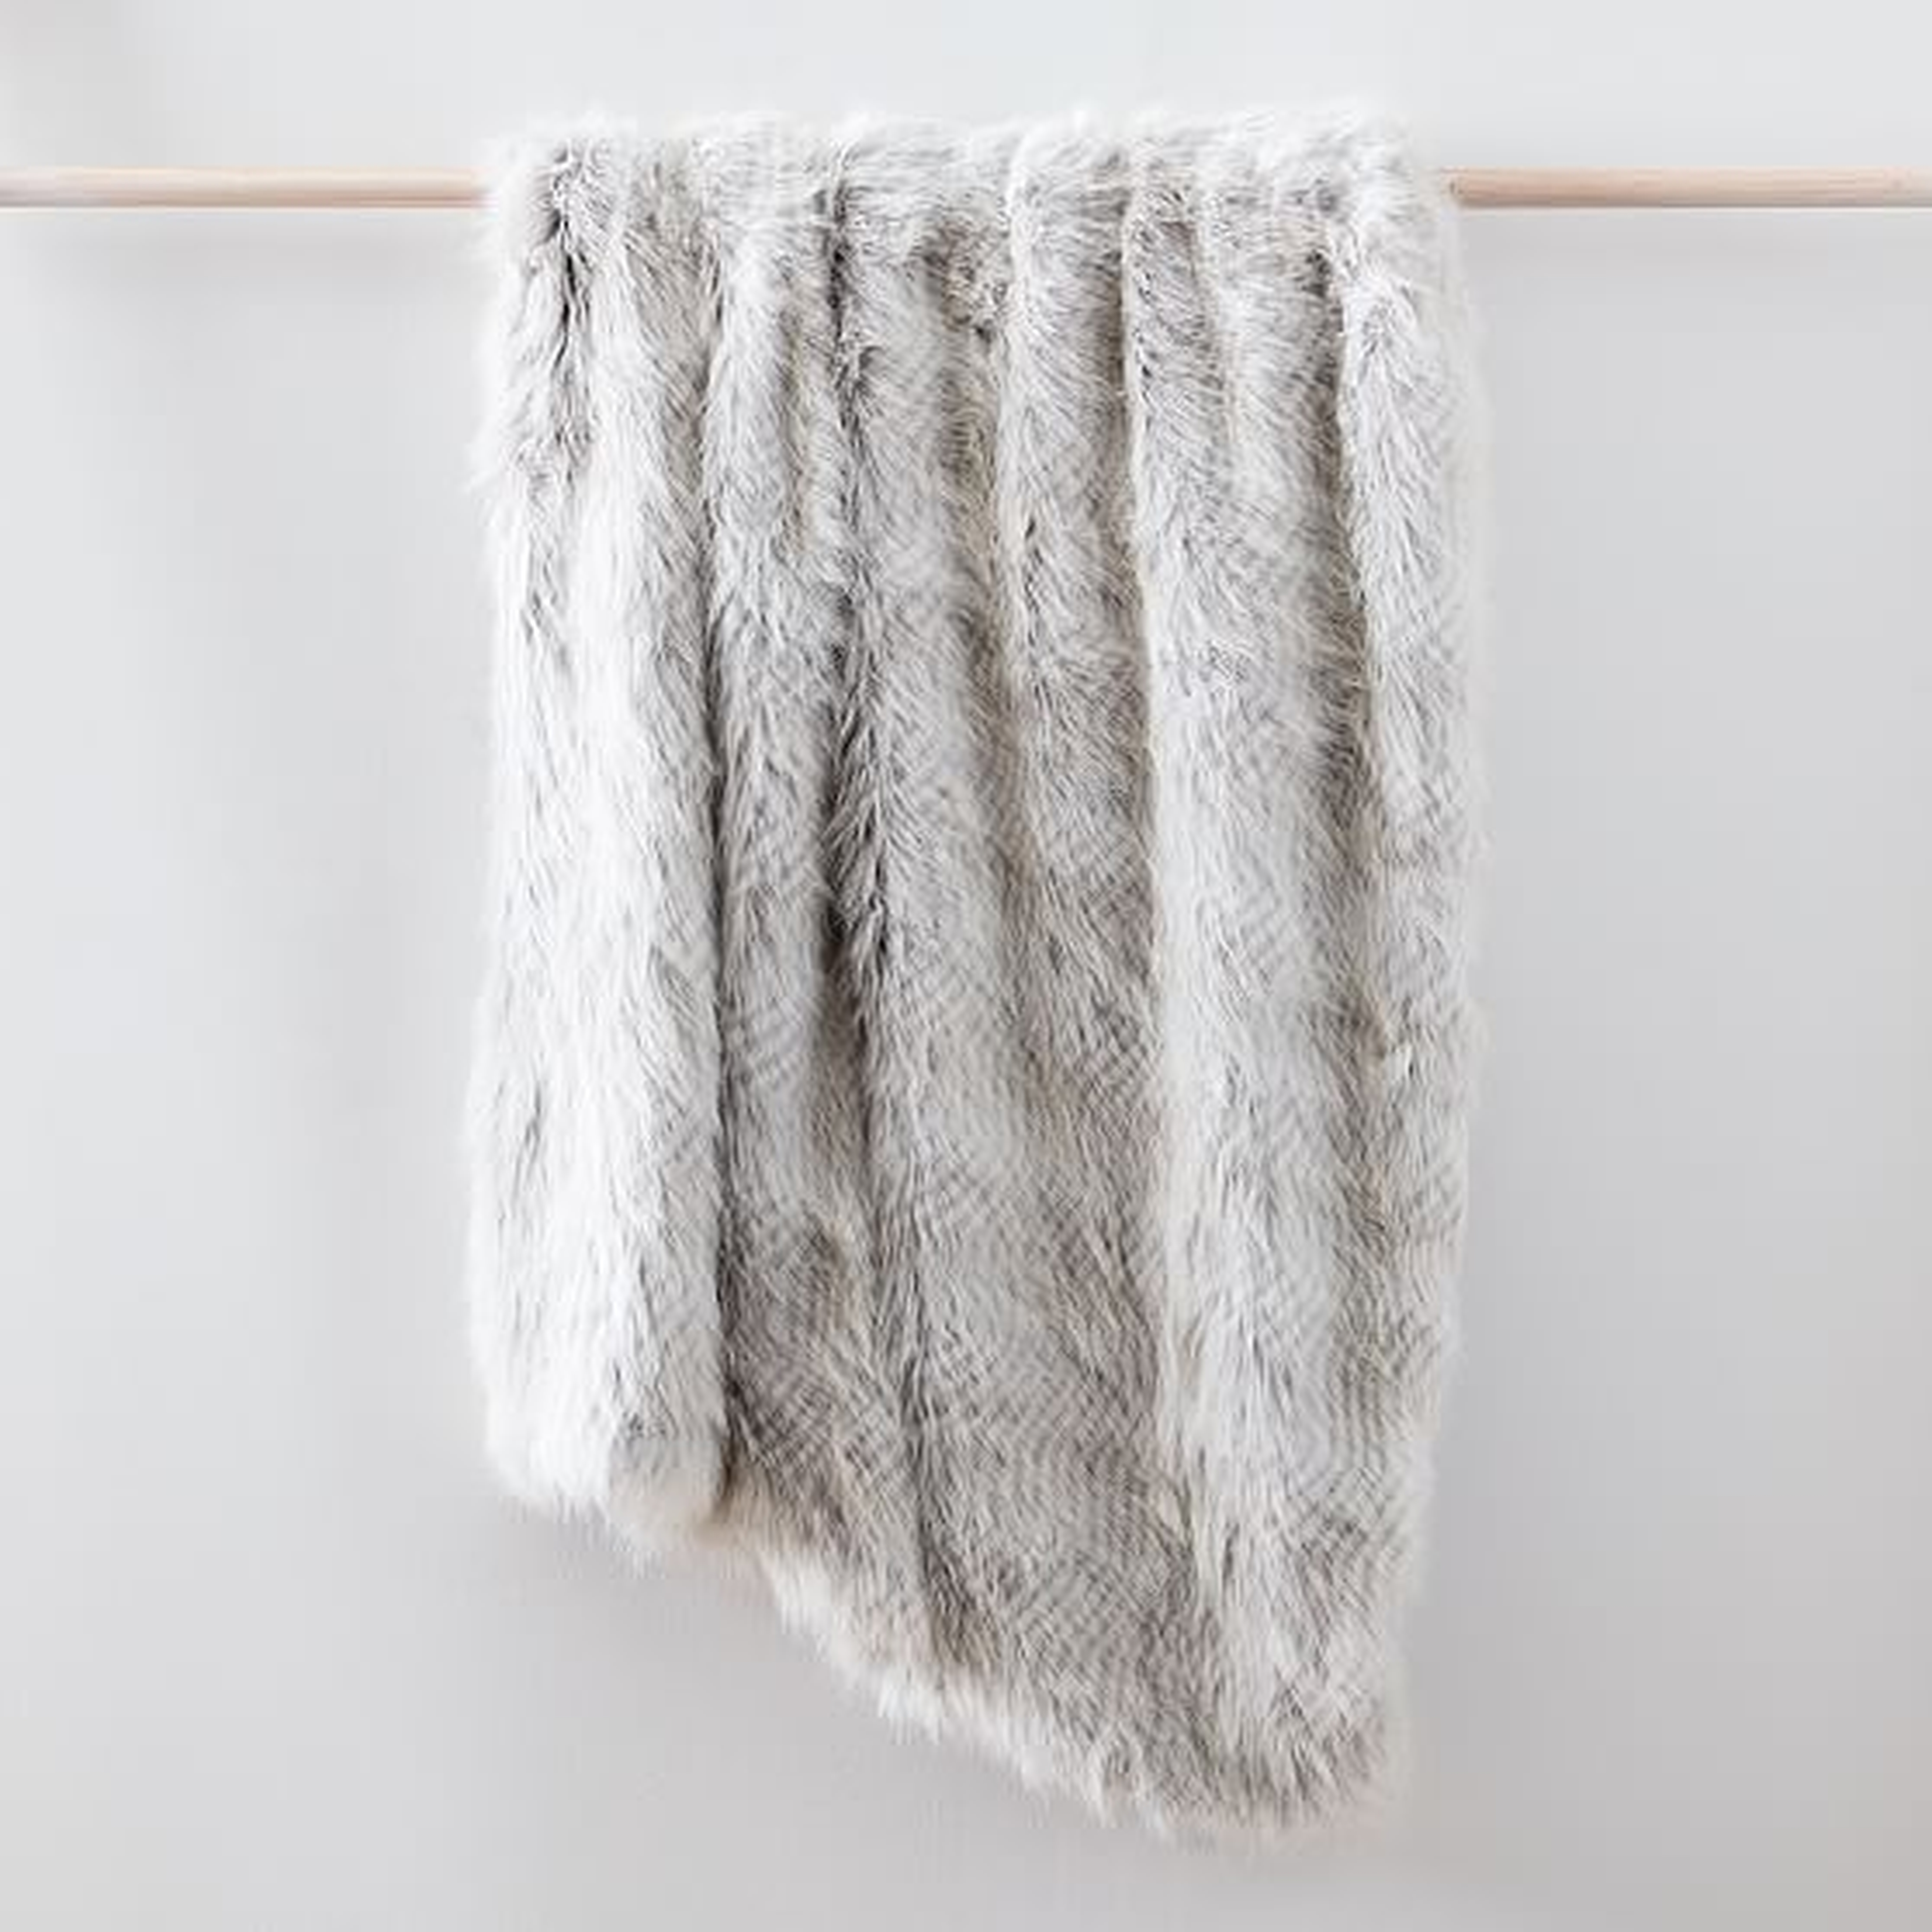 Striped Faux Fur Throw, 47"x60", Frost Gray - West Elm